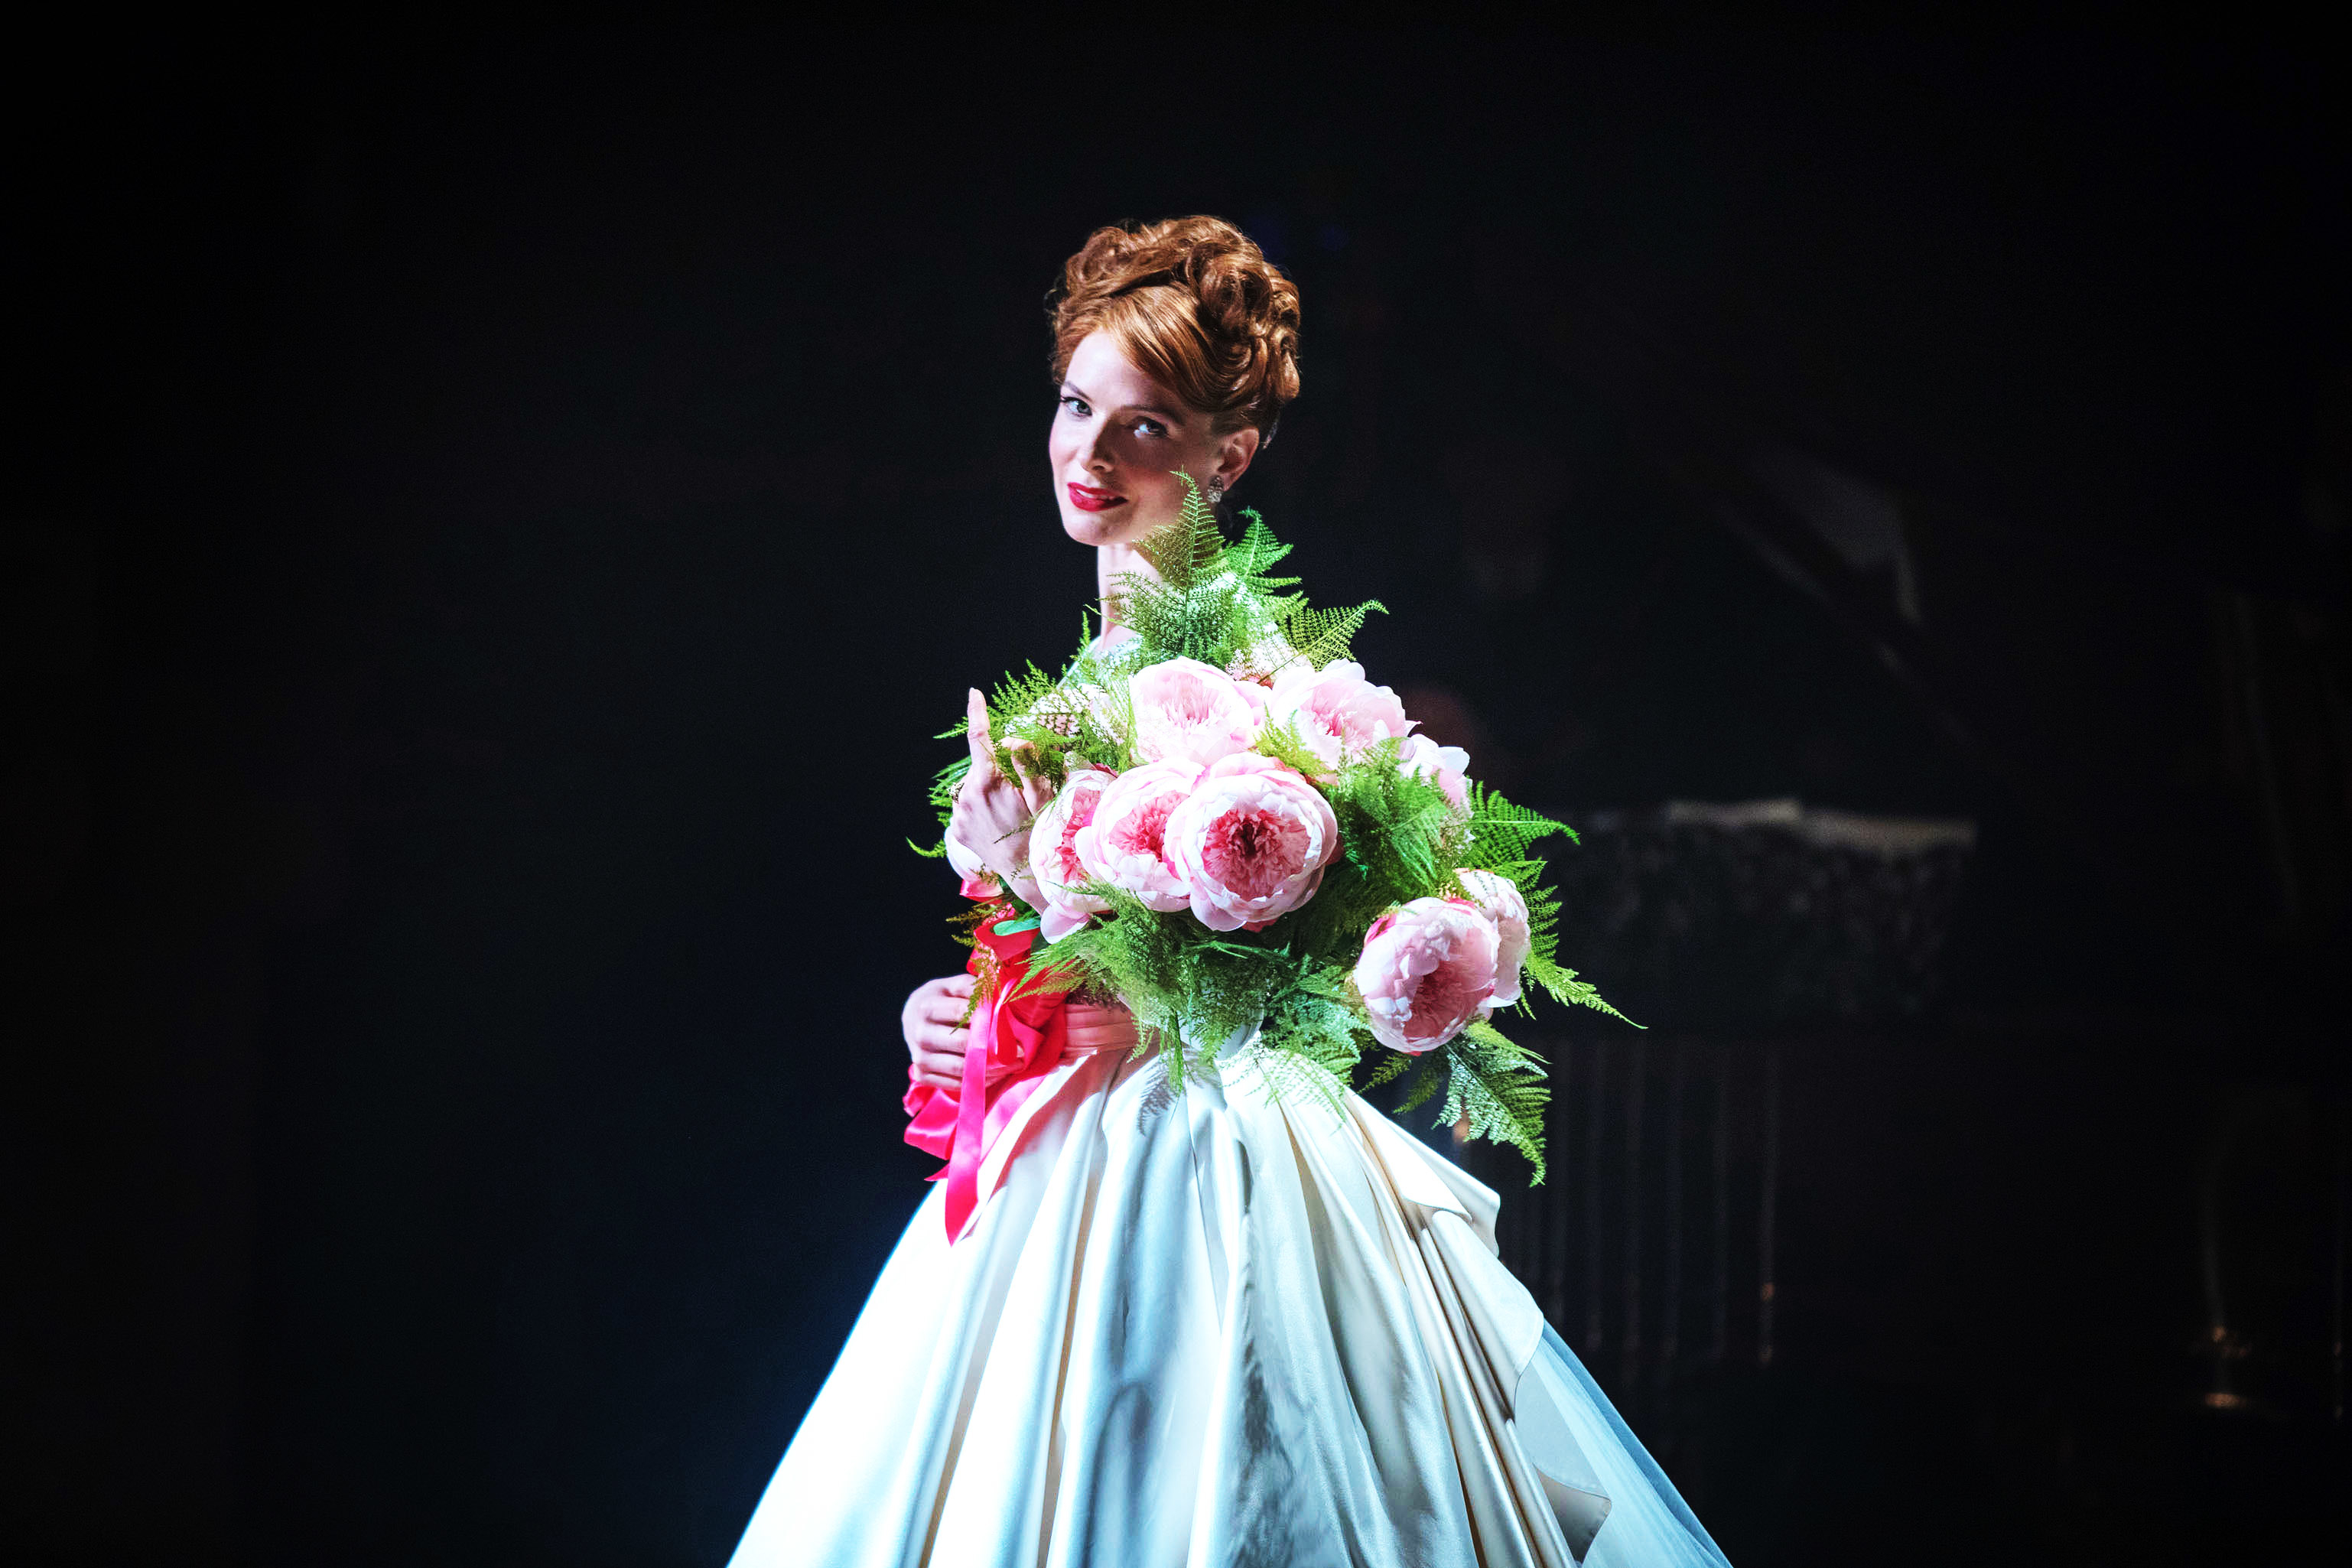 Rebecca Ferguson in historical costume holds bouquet onstage, evoking a classical period drama scene